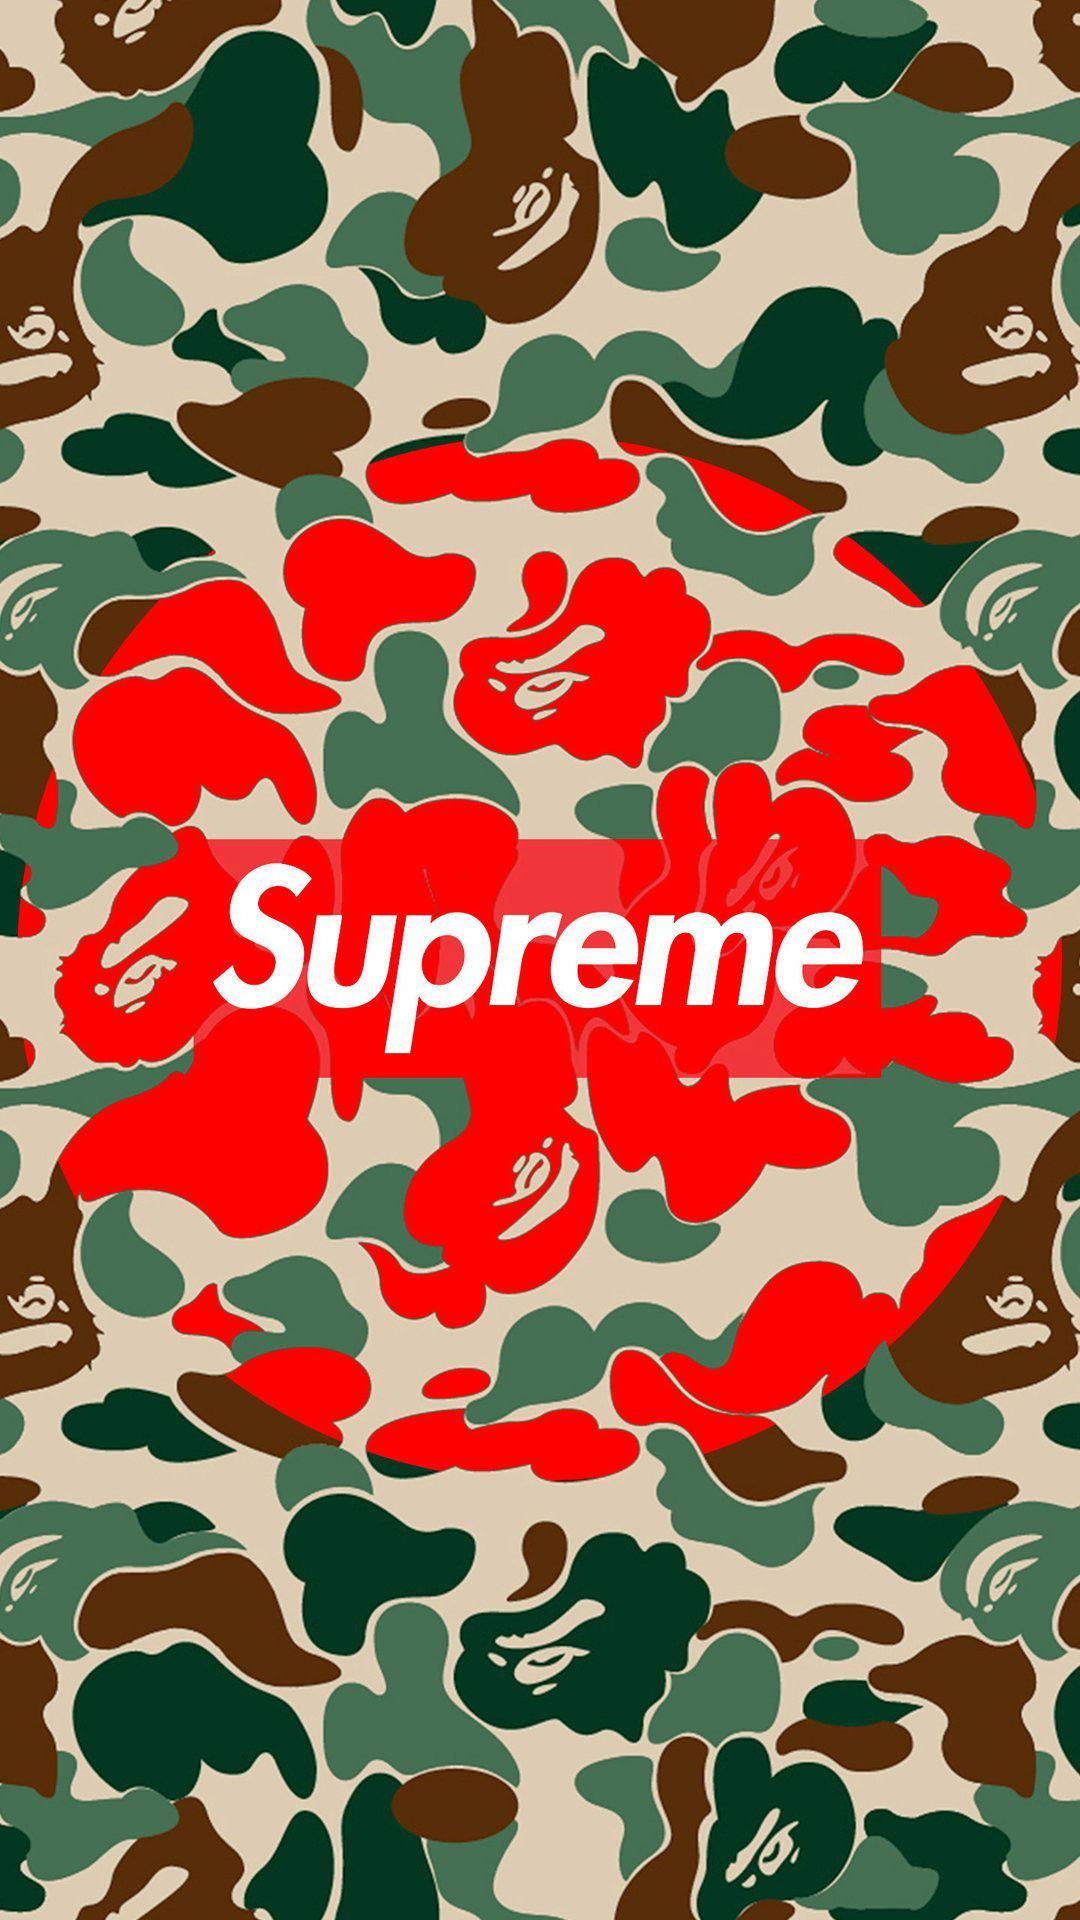 12705 Bape iphone  Android iPhone Desktop HD Backgrounds  Wallpapers  1080p 4k HD Wallpapers Desktop Background  Android  iPhone 1080p 4k  1080x1918 2023